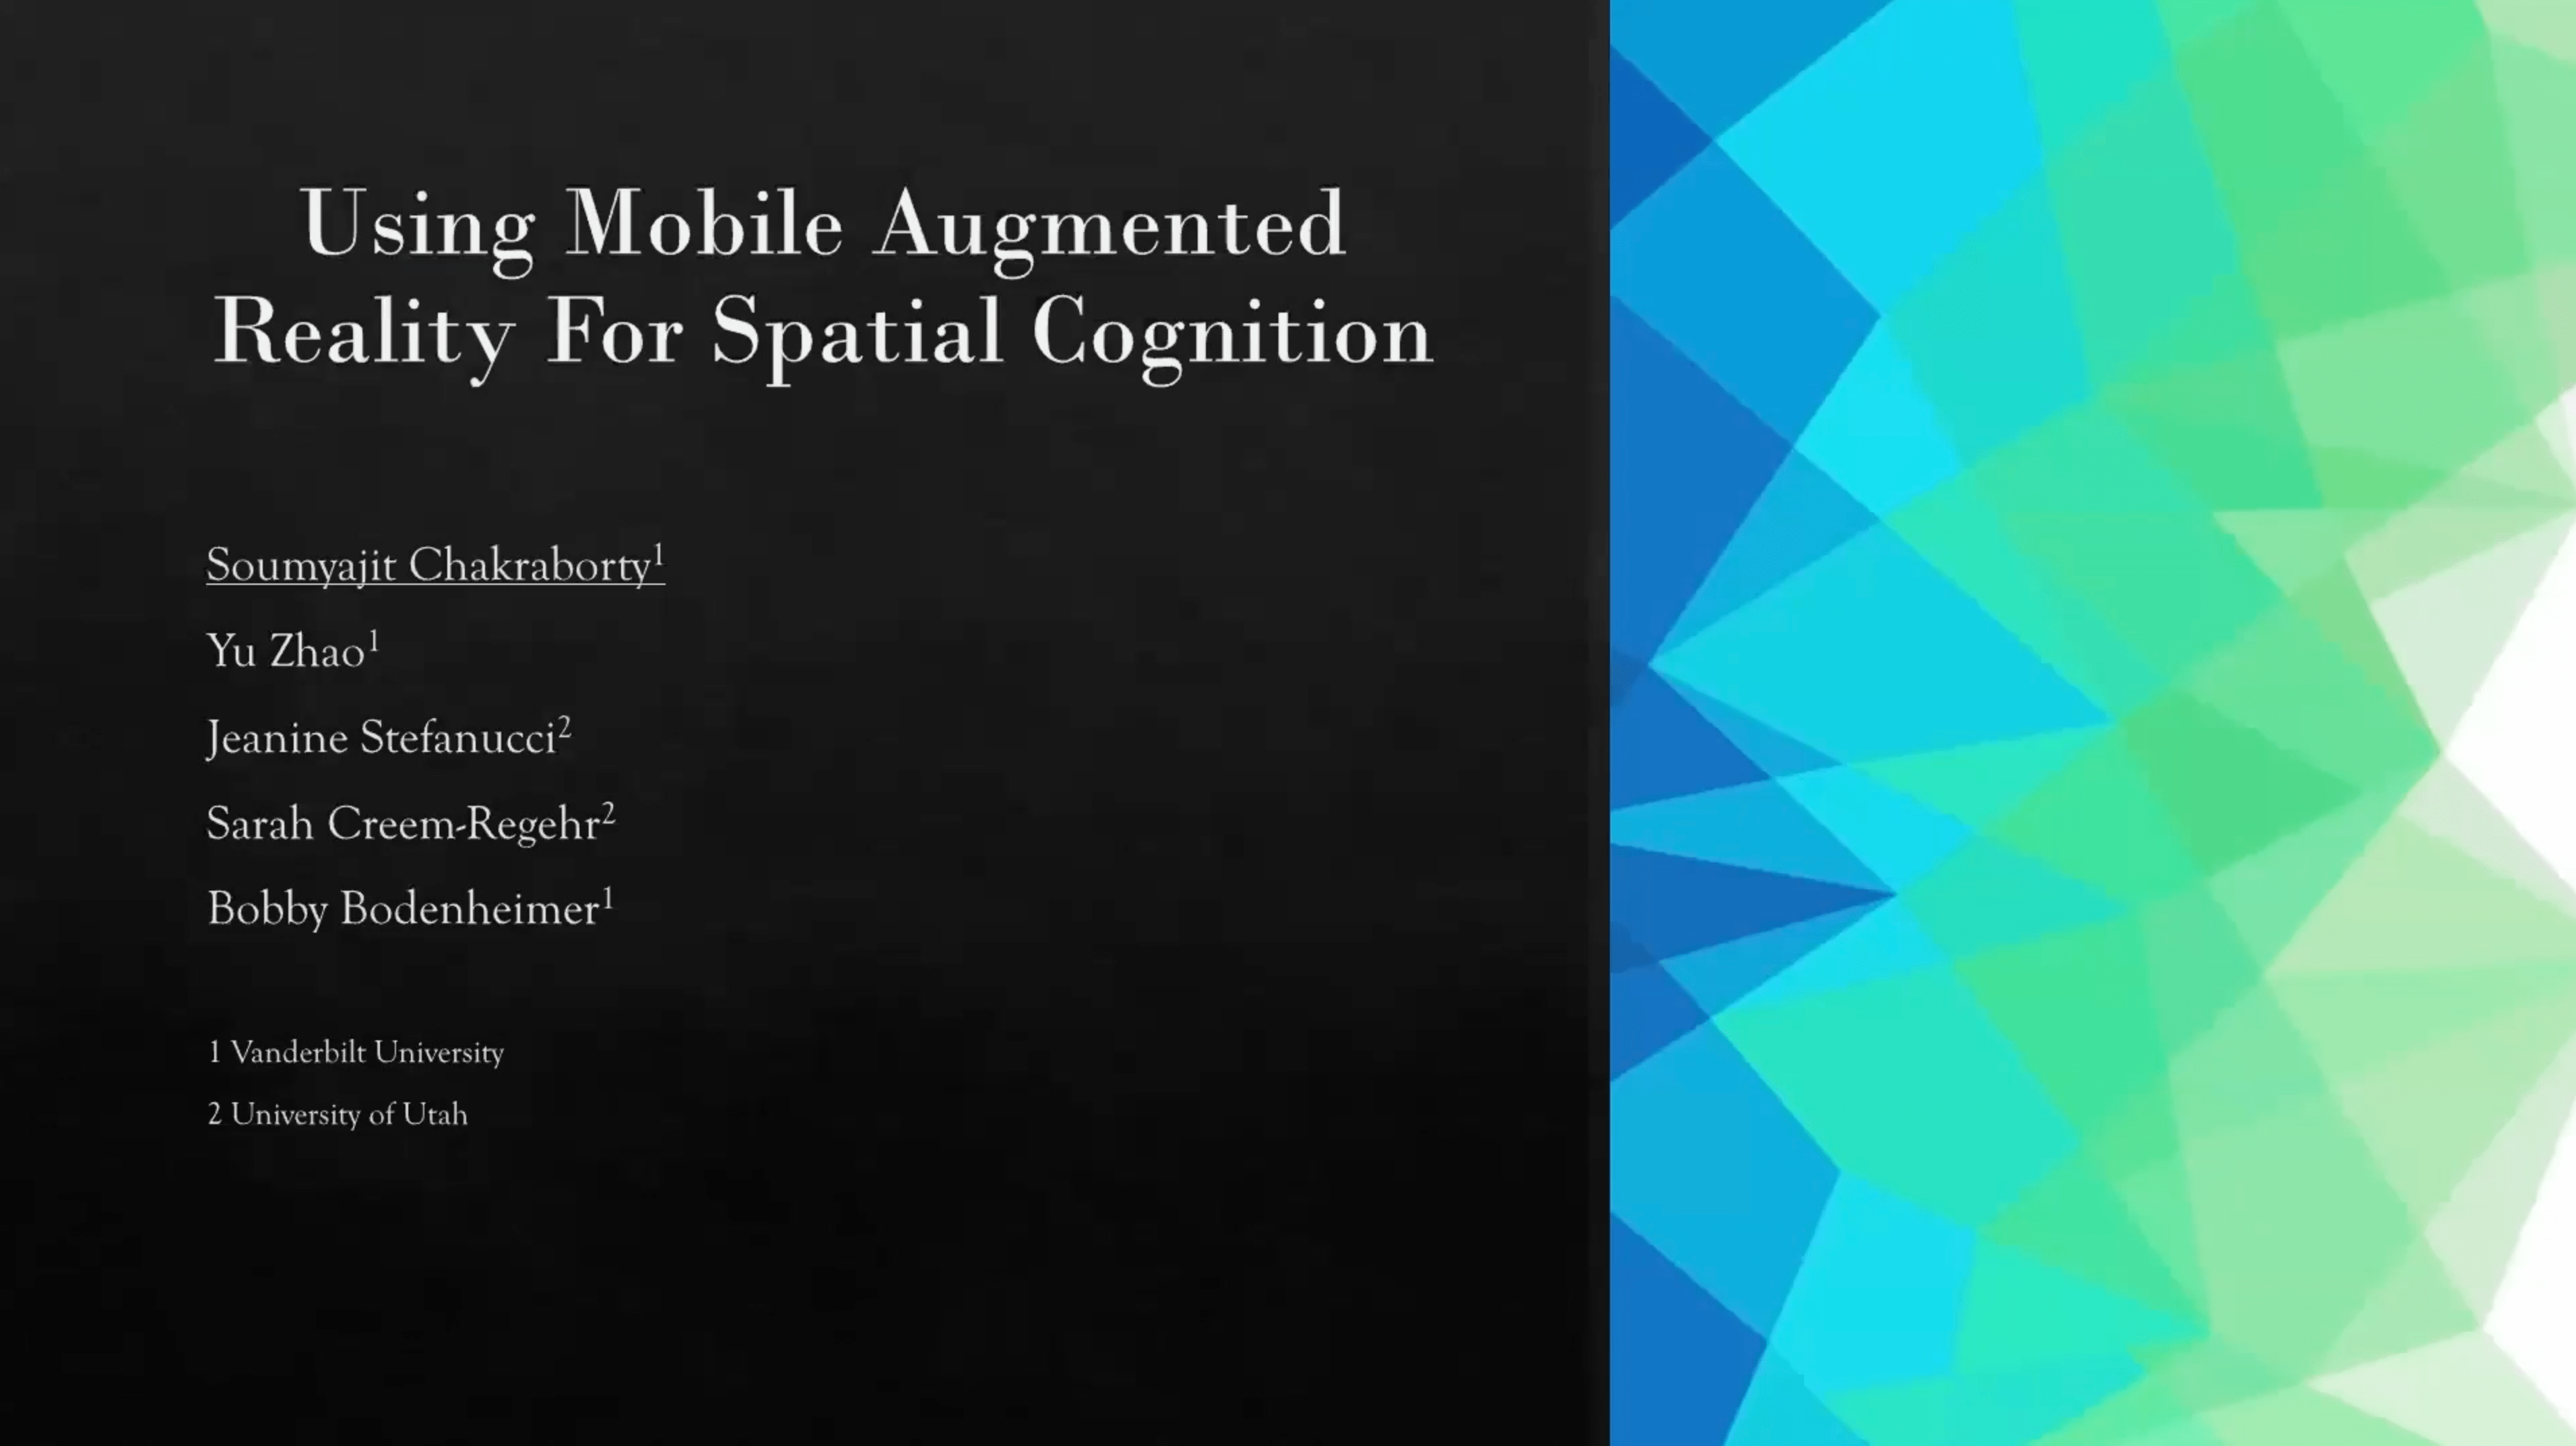 Using Mobile Augmented Reality for Spatial Cognition